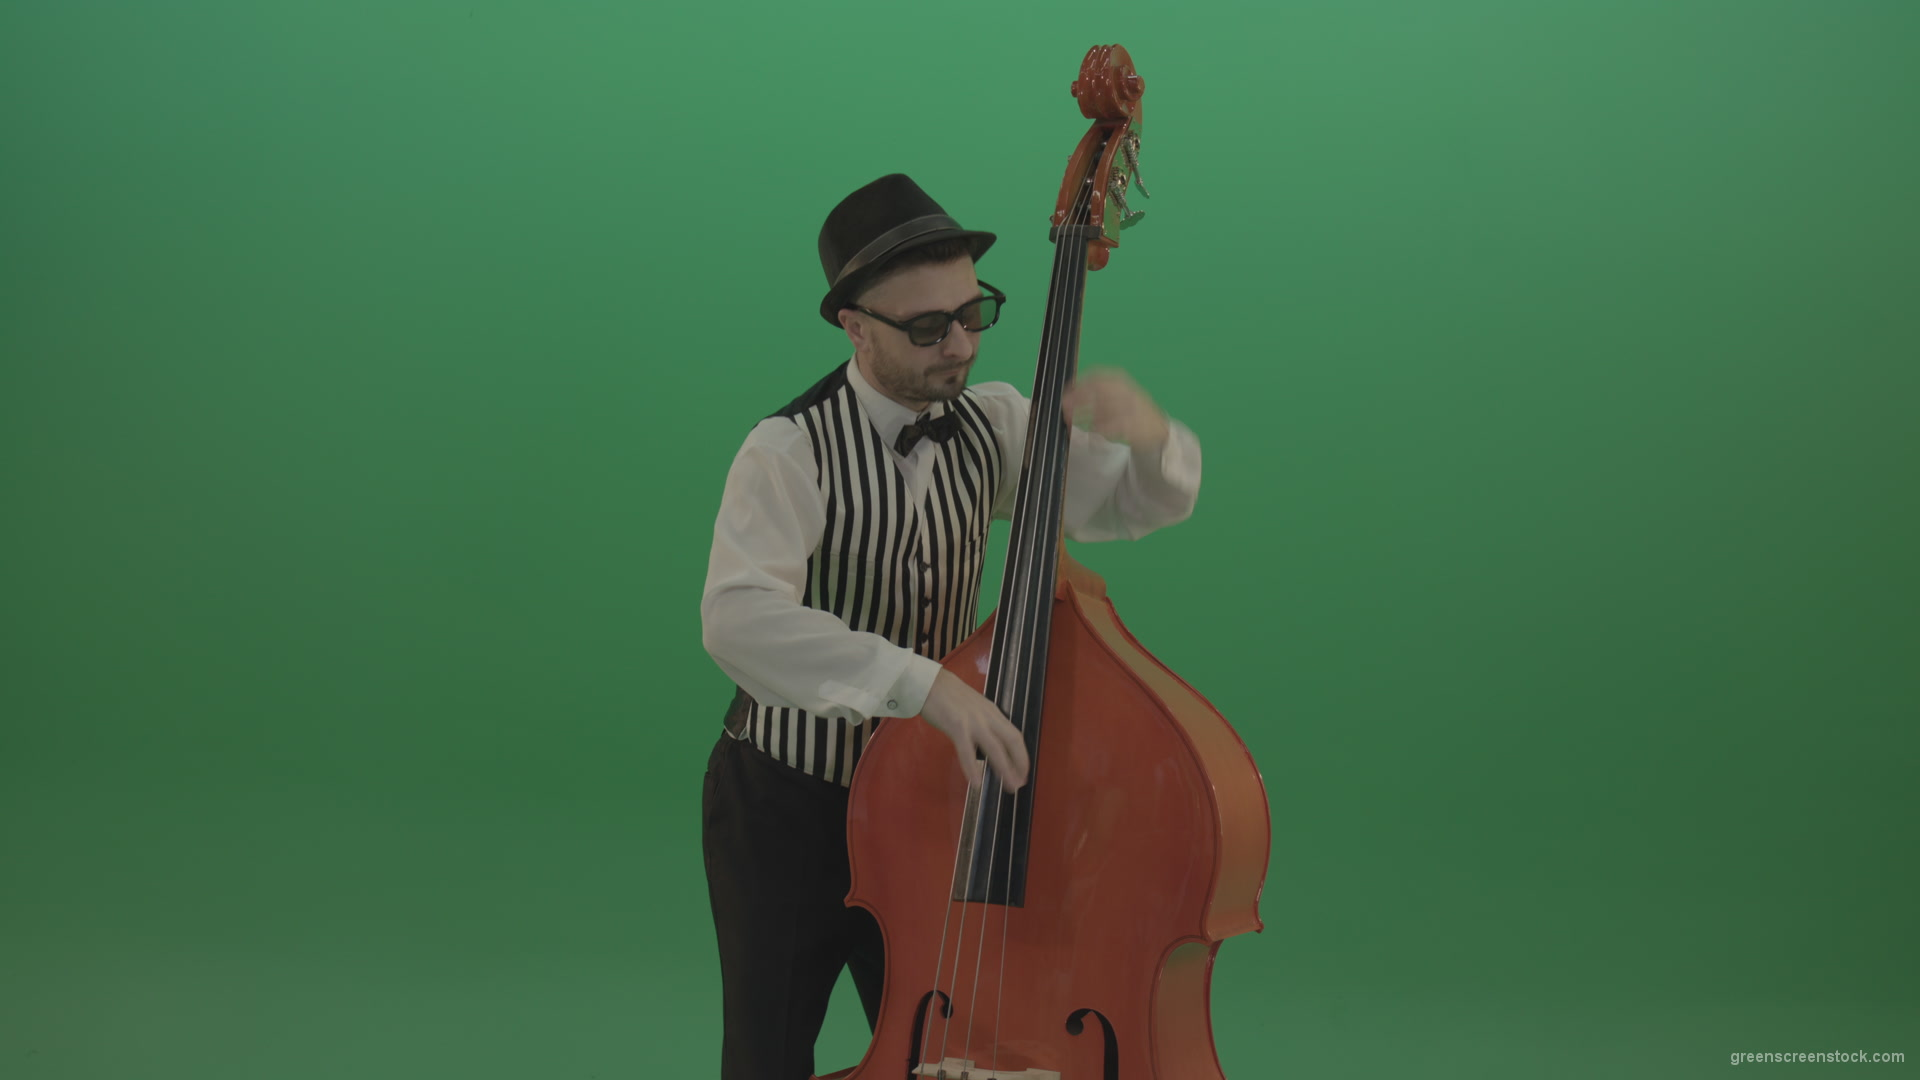 Virtuoso-man-playing-jazz-on-double-bass-String-music-instrument-isolated-on-green-screen_007 Green Screen Stock